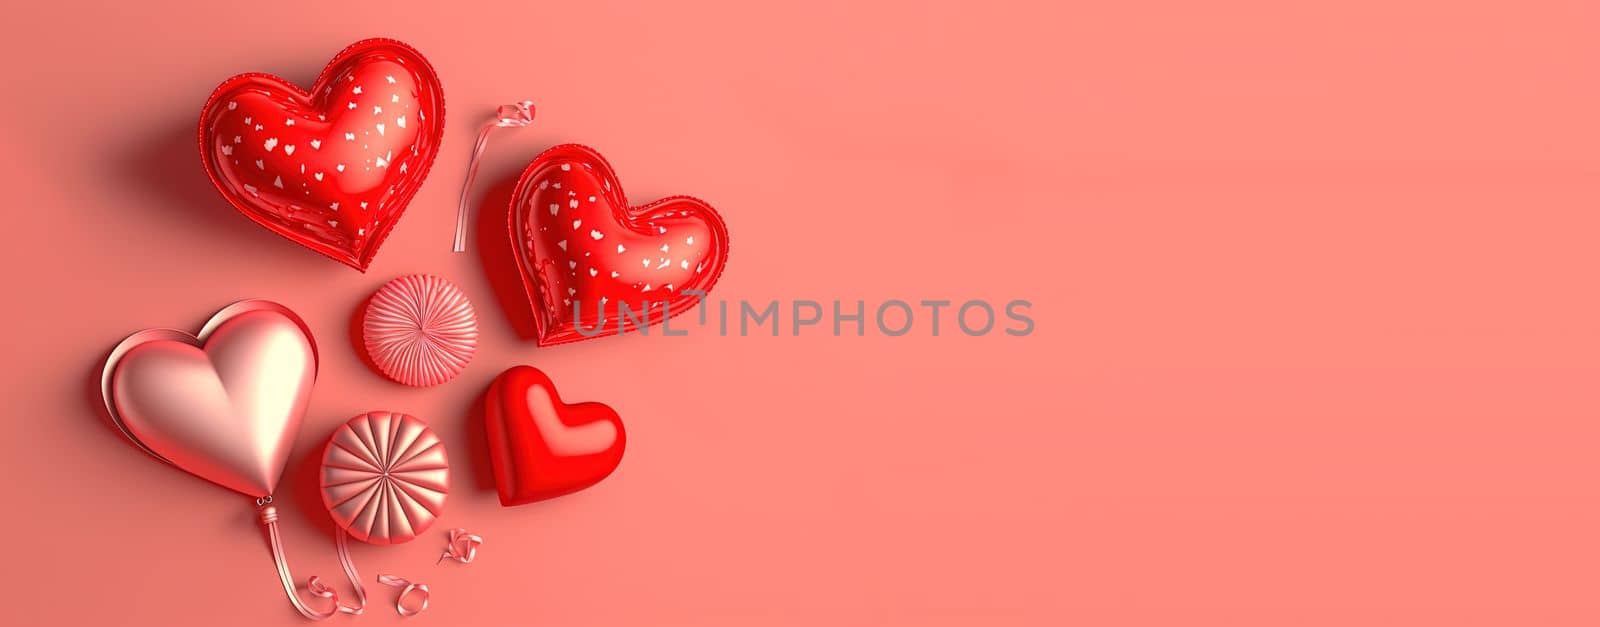 "Valentine's Day background with a radiant red 3D heart